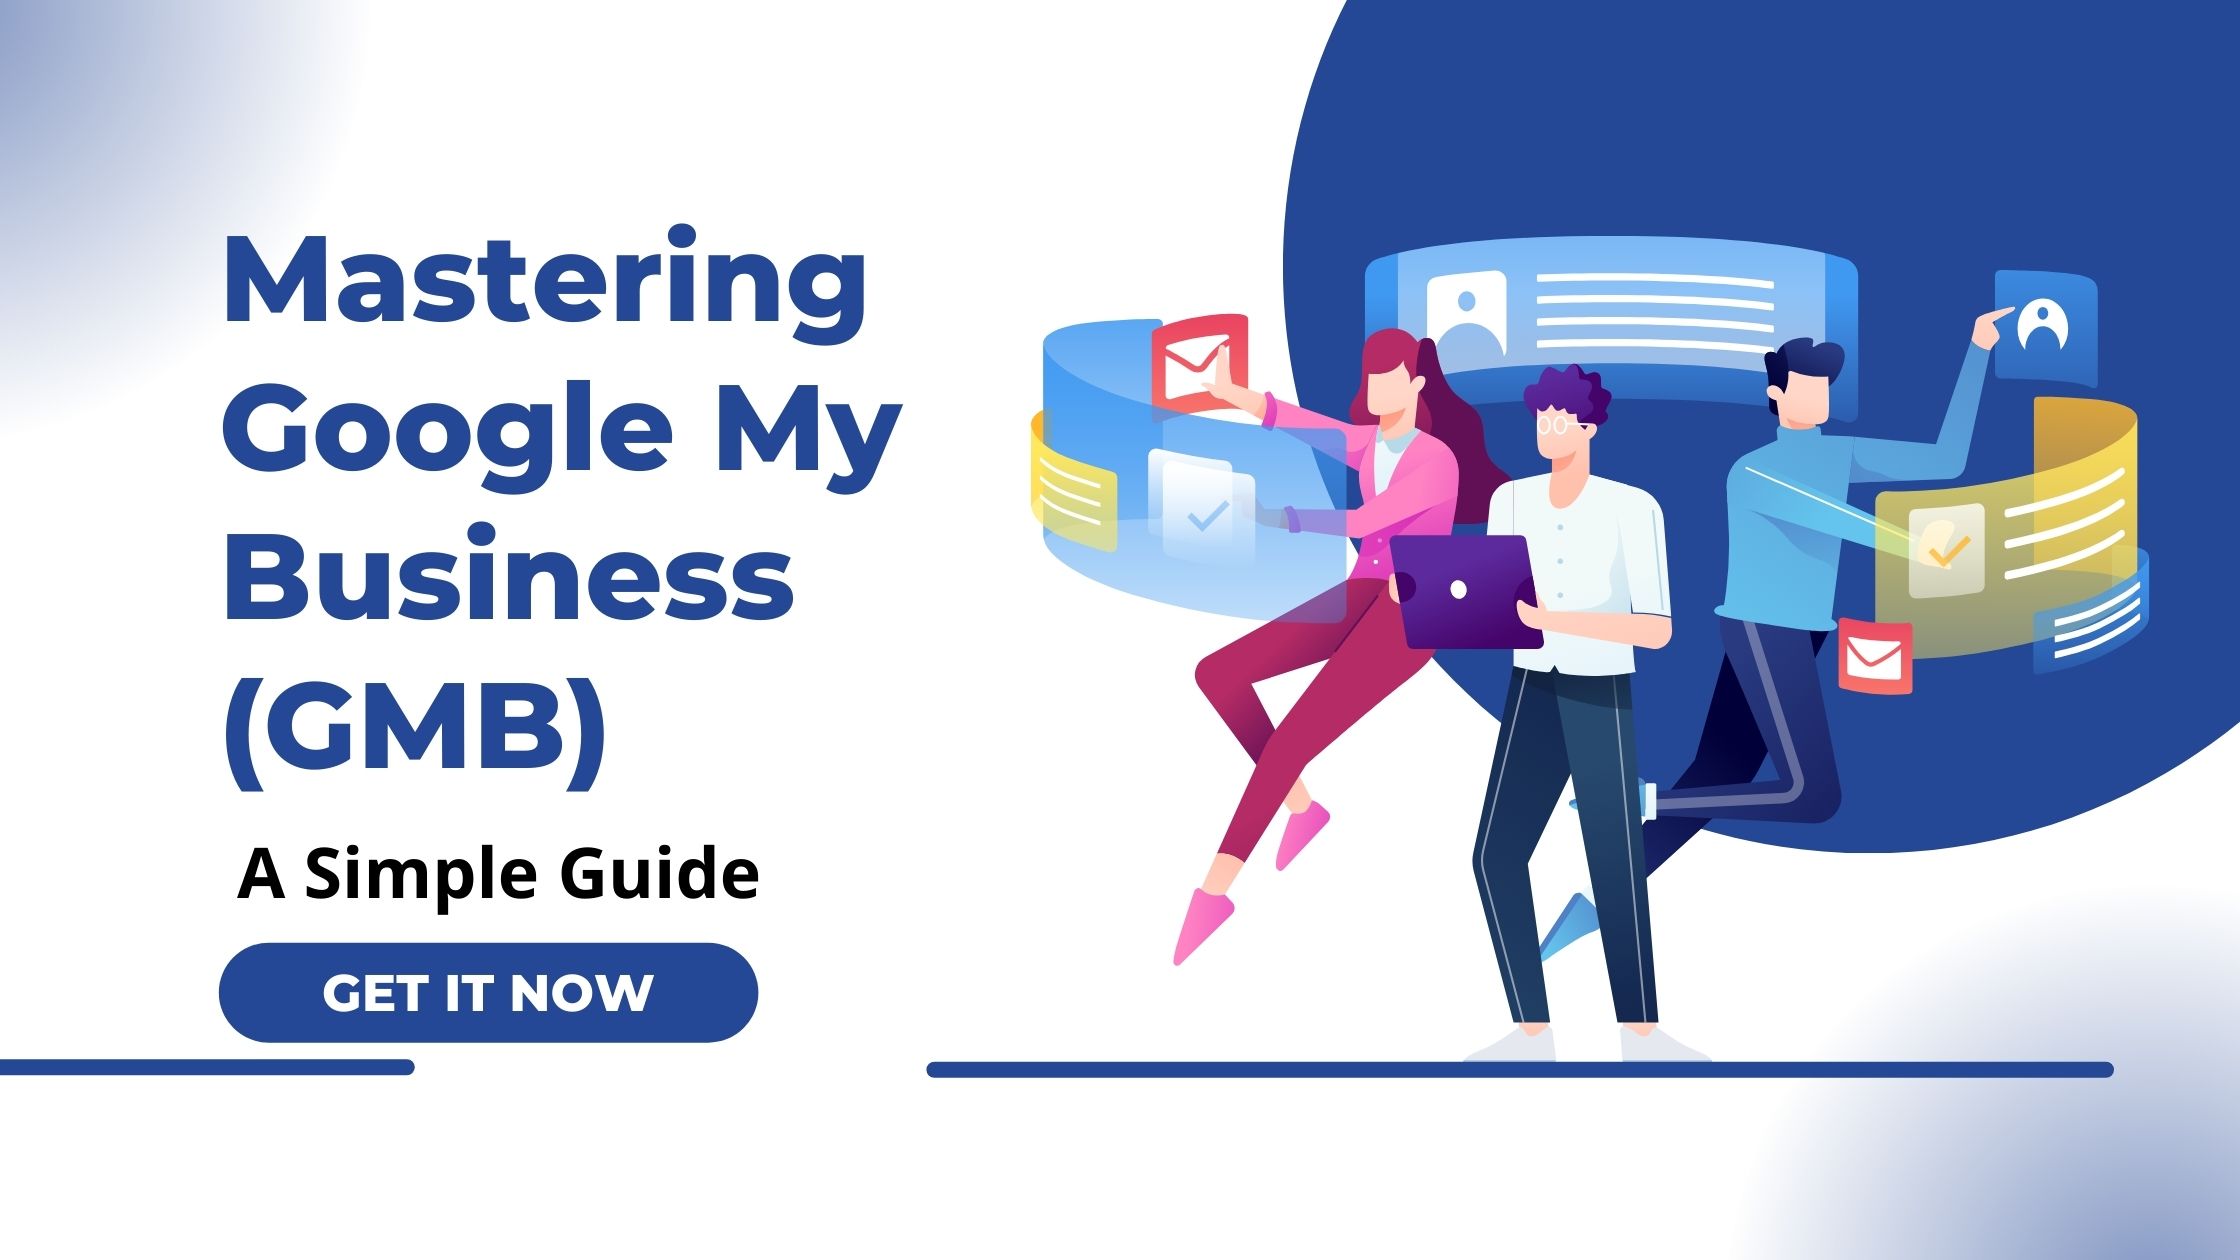 Mastering Google My Business (GMB): A Simple Guide